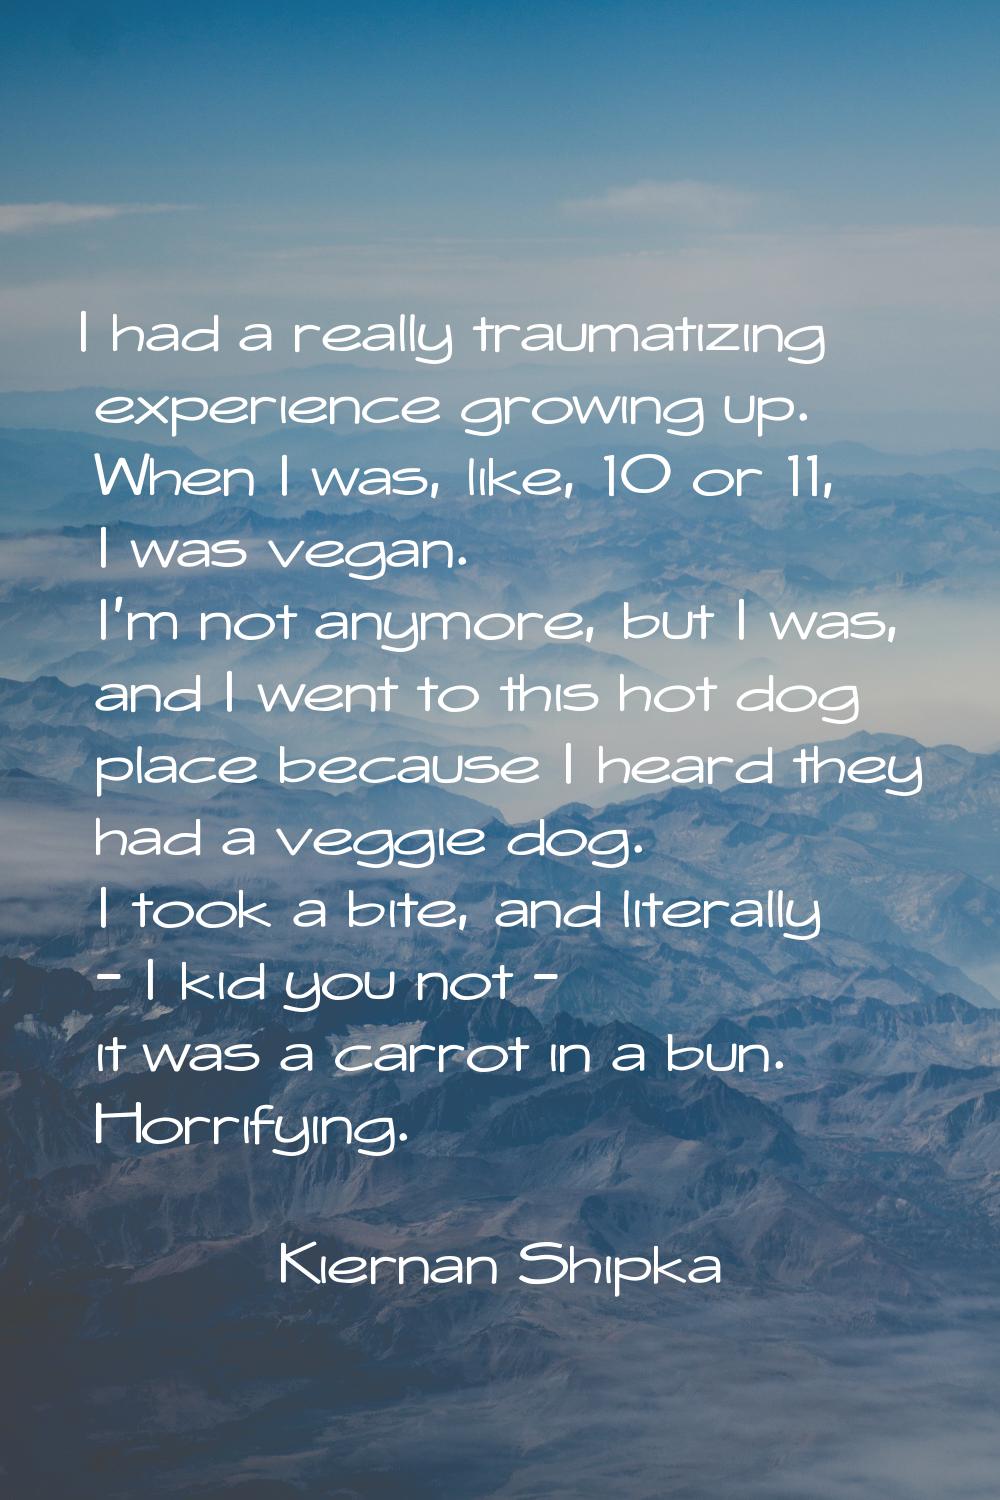 I had a really traumatizing experience growing up. When I was, like, 10 or 11, I was vegan. I'm not